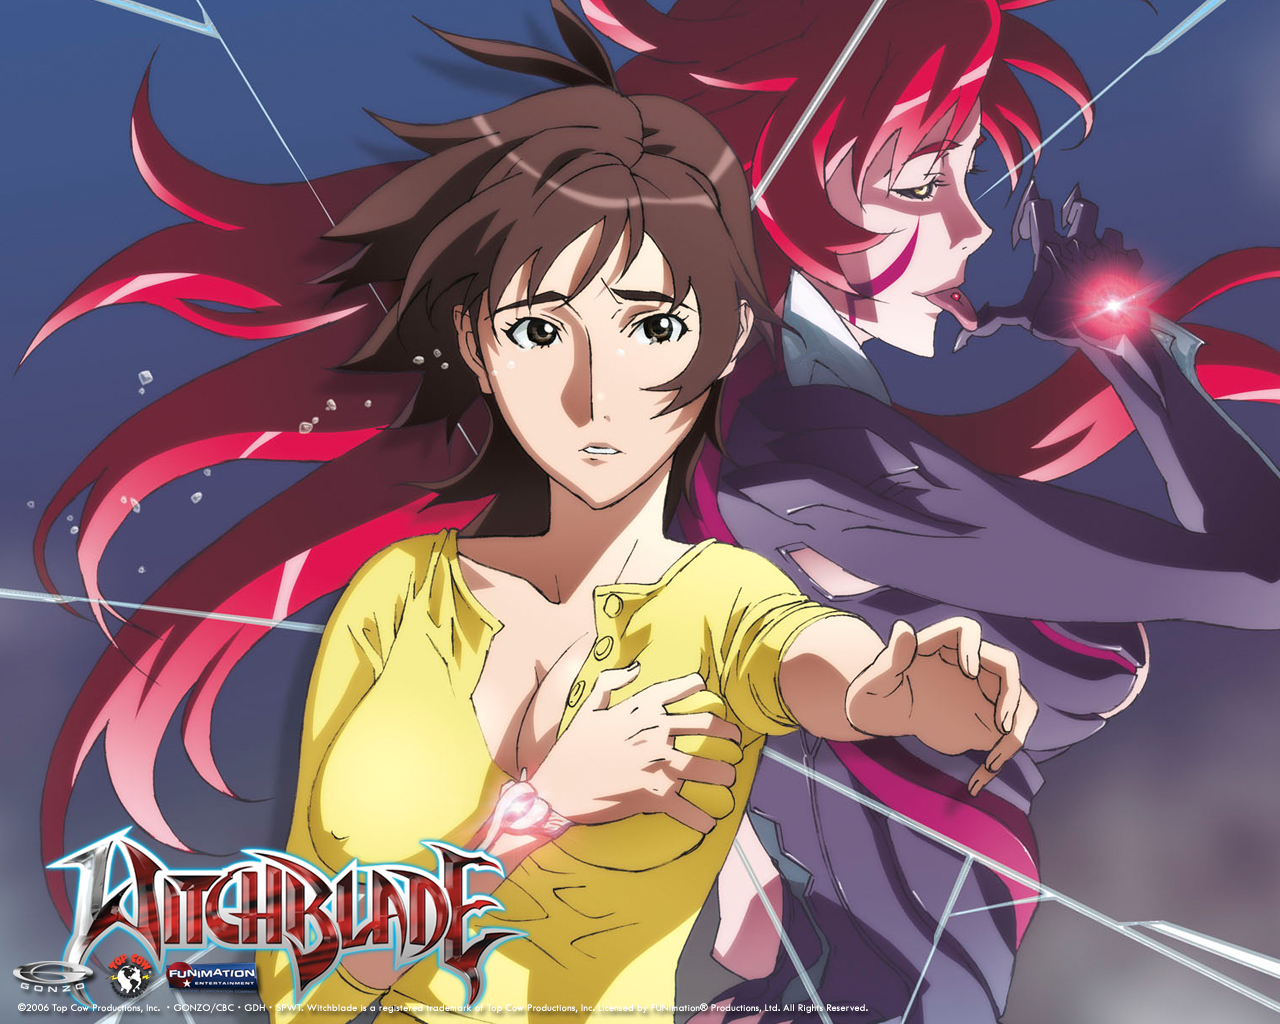 Witchblade [Anime] images WitchBlade HD wallpaper and 1280x1024